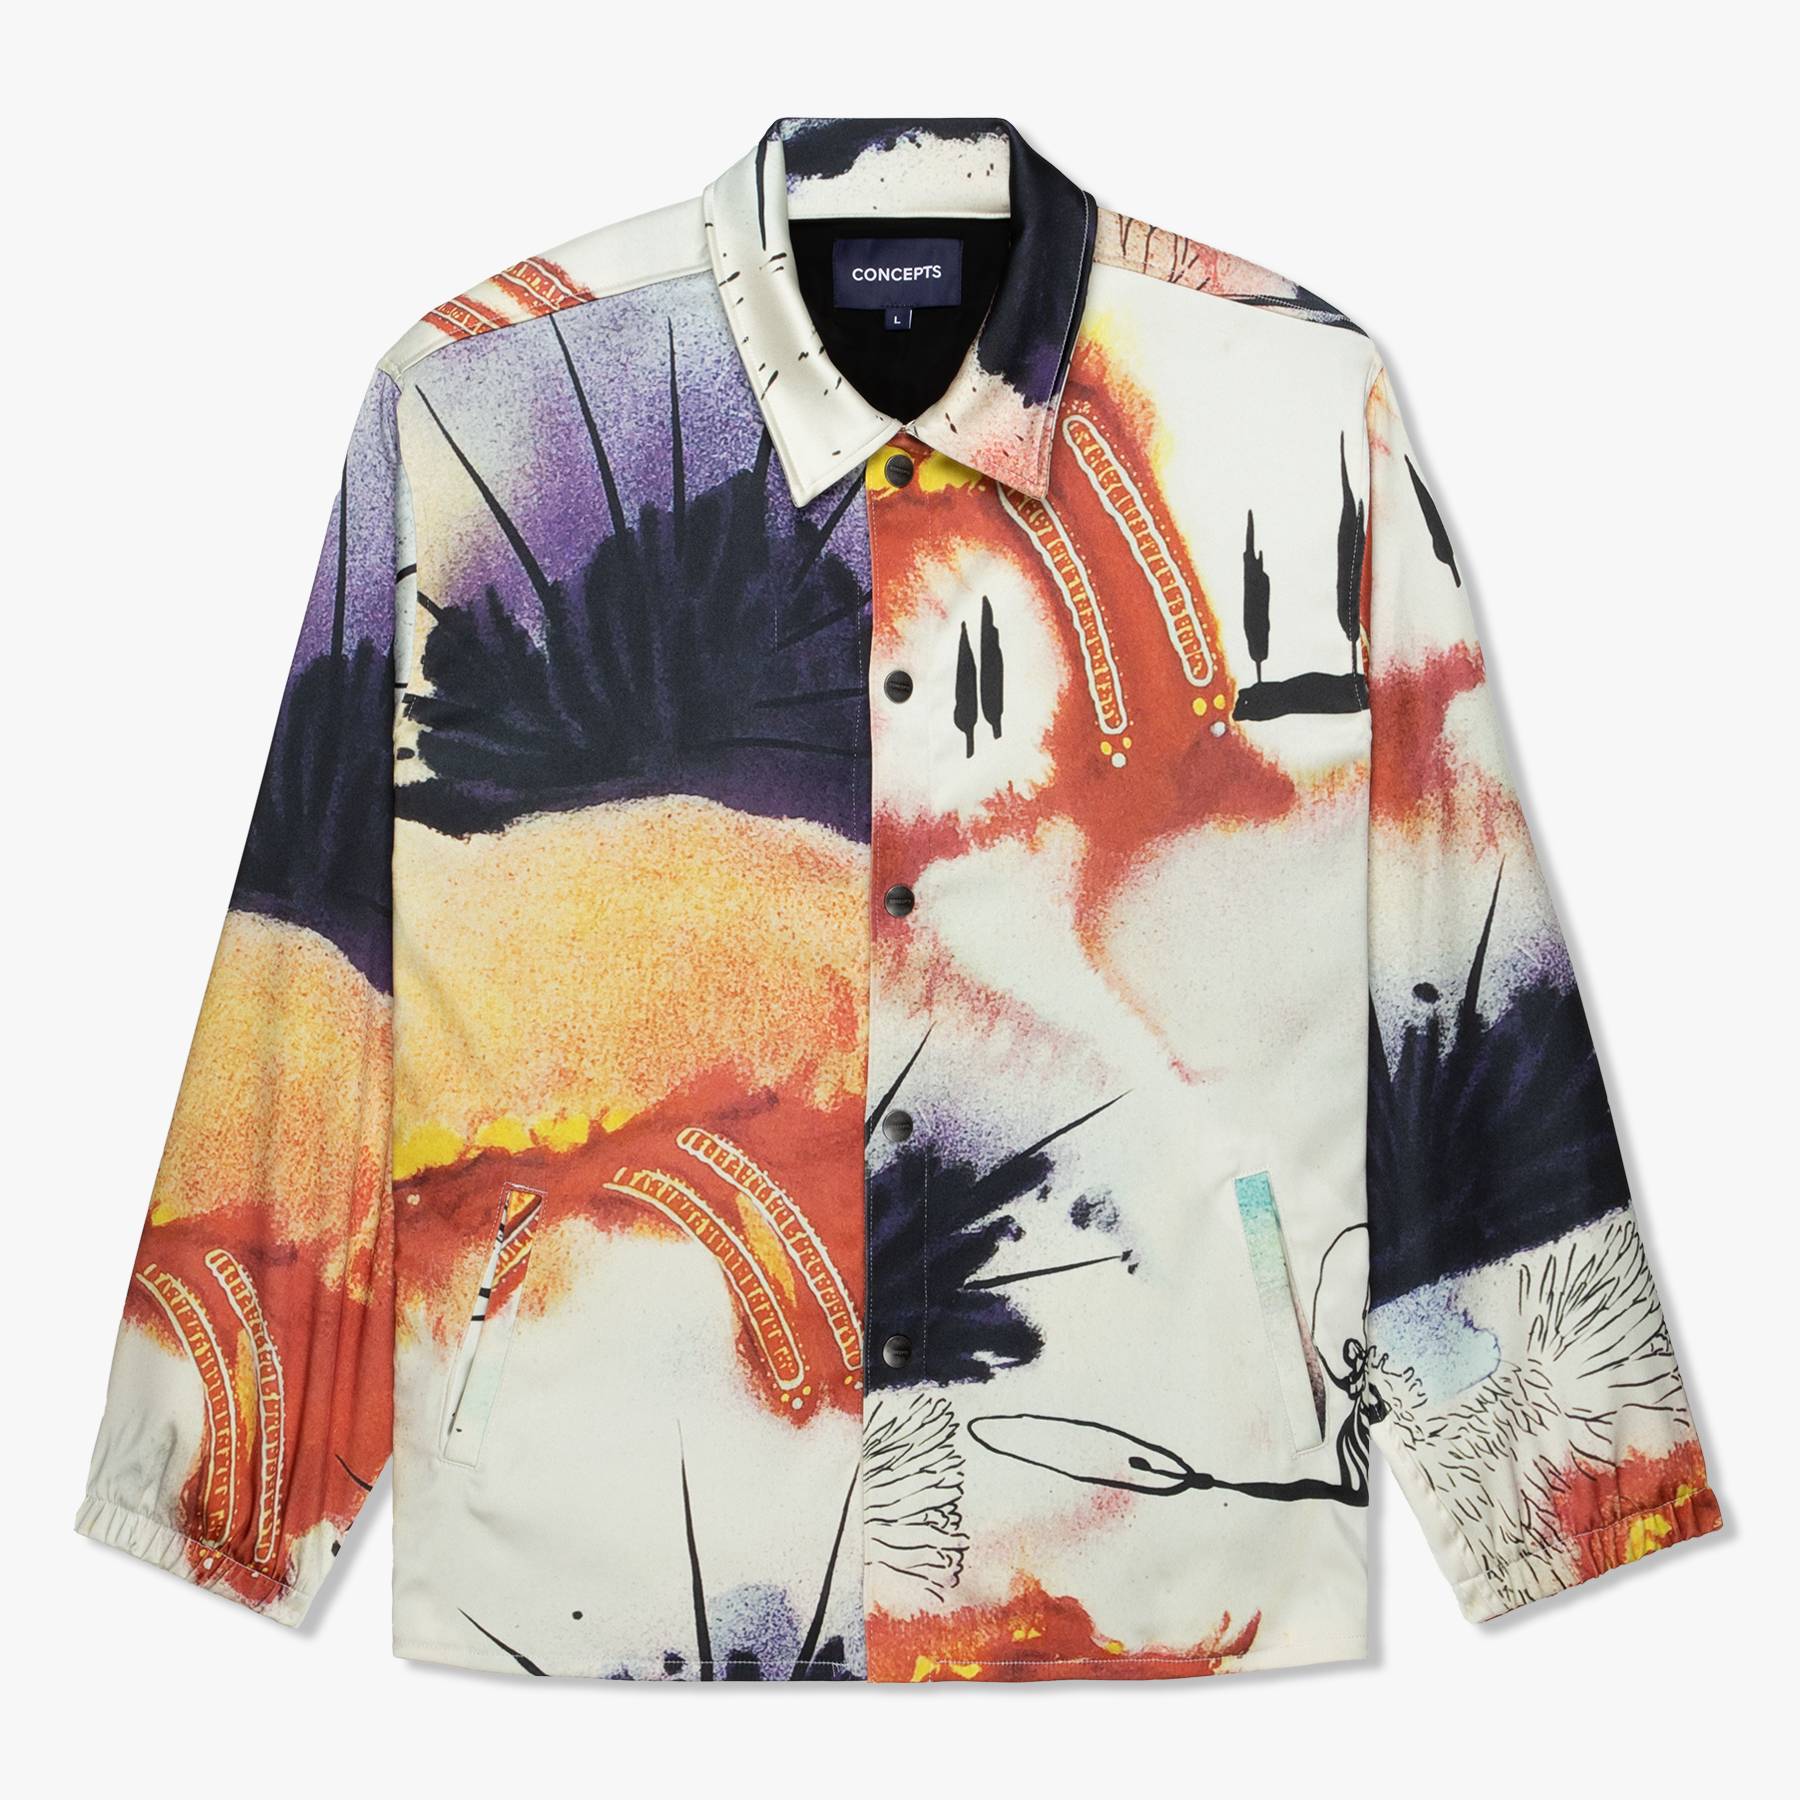 Concepts Lobster_DALI COACHES JACKET 